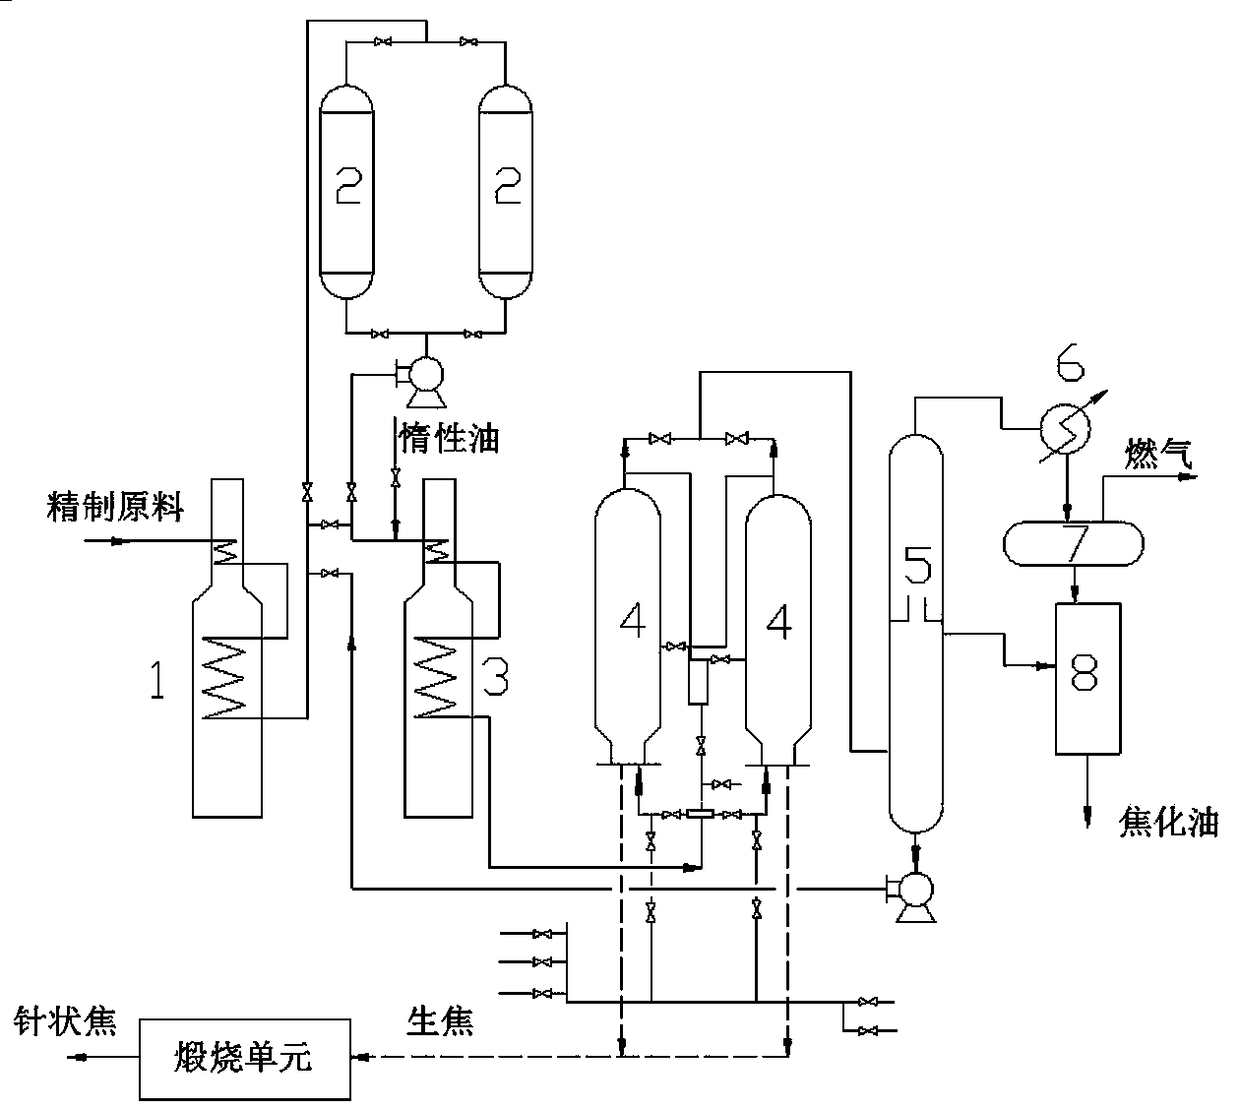 Delayed coking process for preparing coal-based needle coke